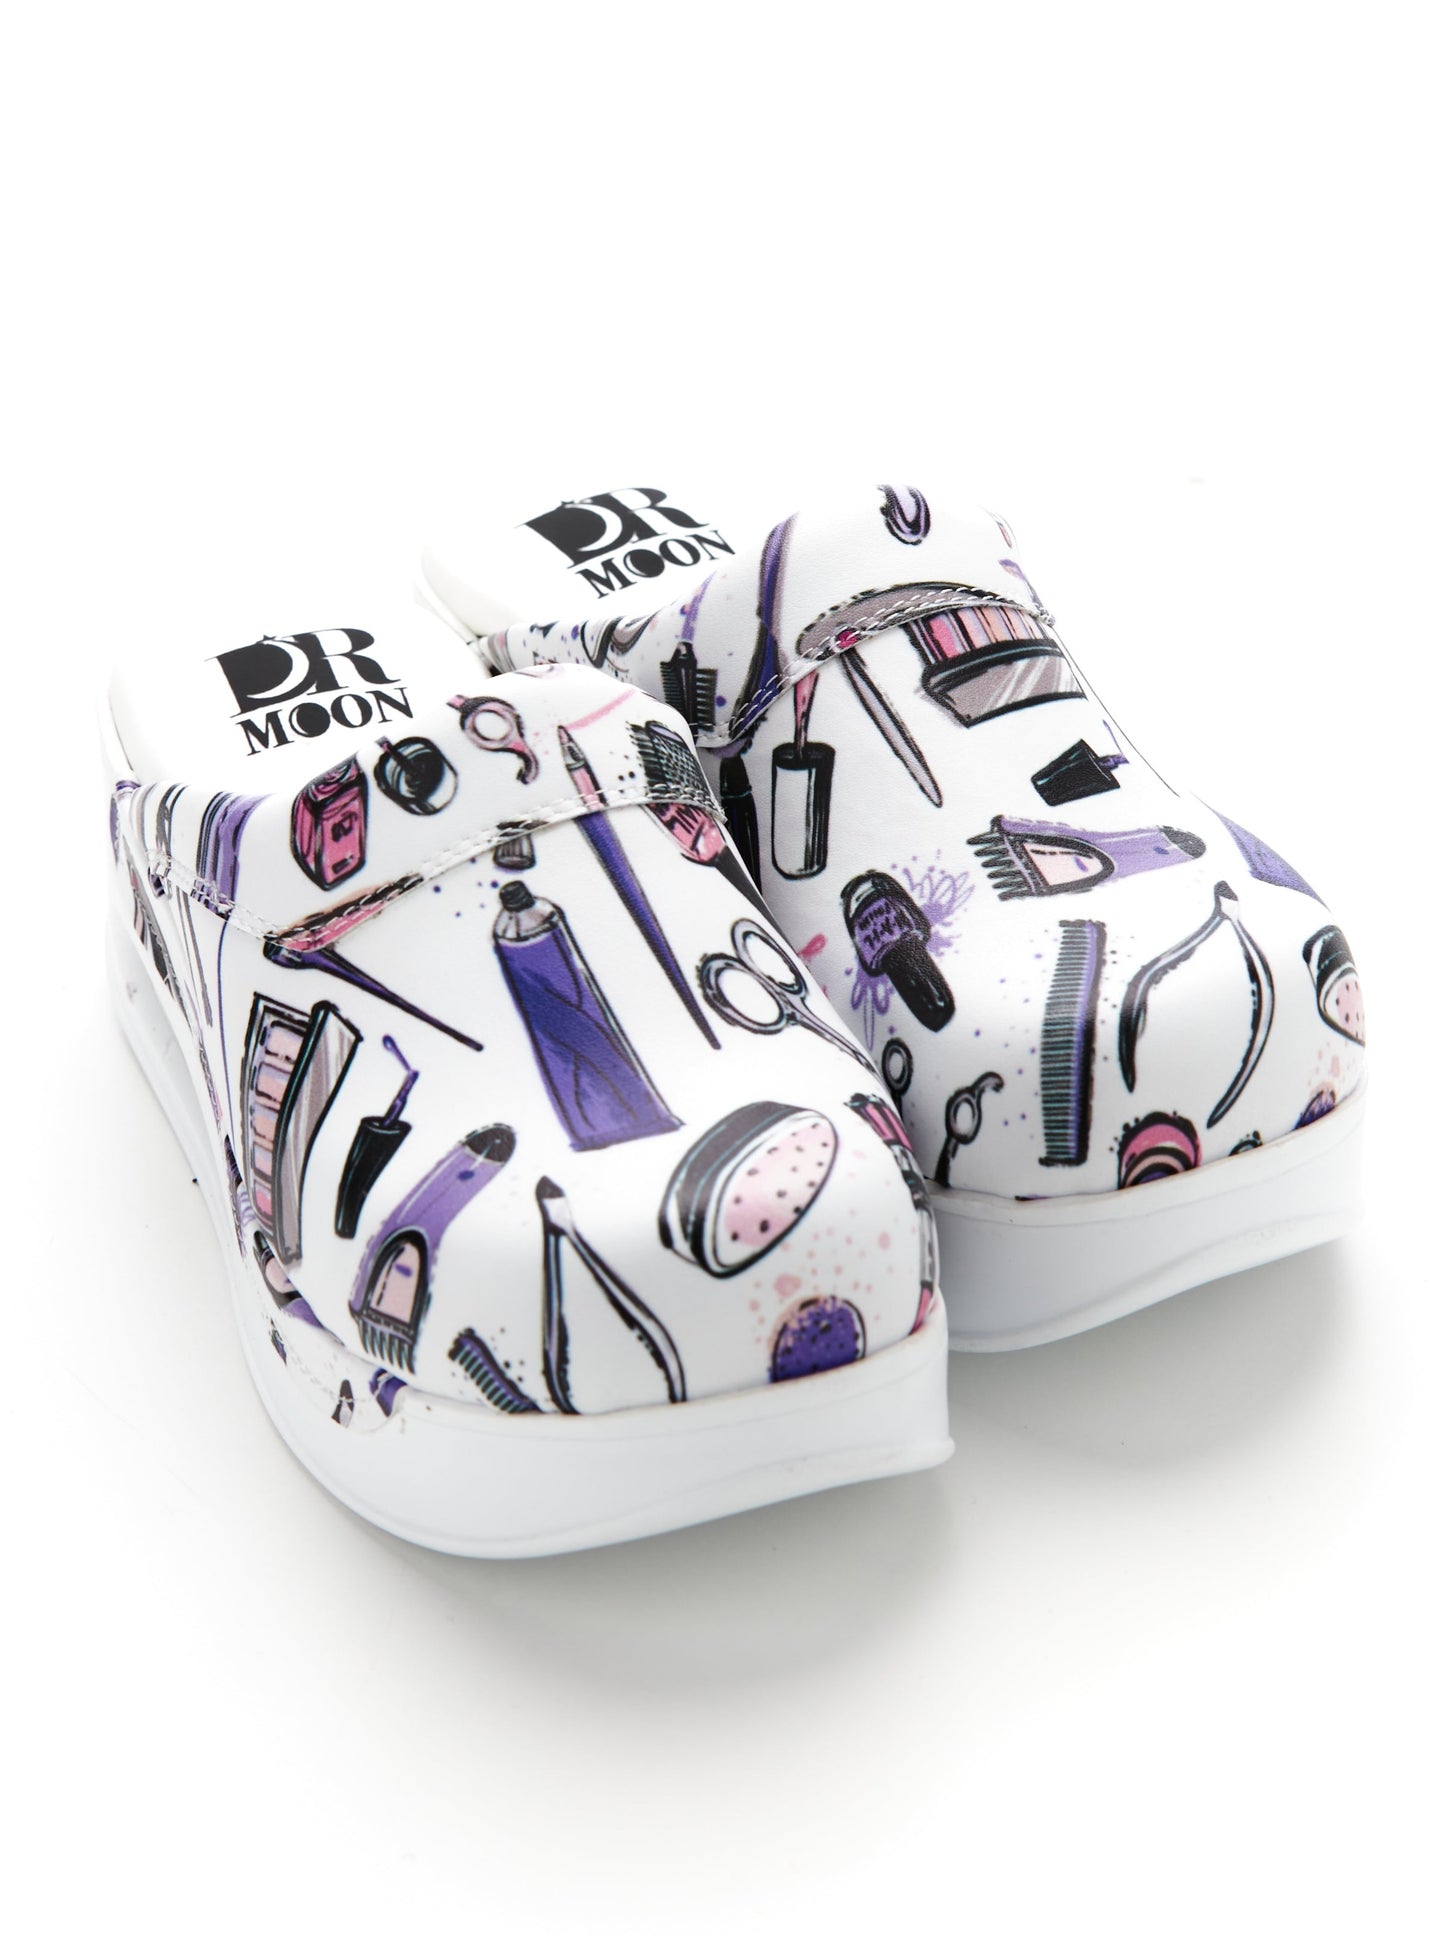 Orthopedic Medical Clogs, White with Print, Women - Airmax Beauty Model